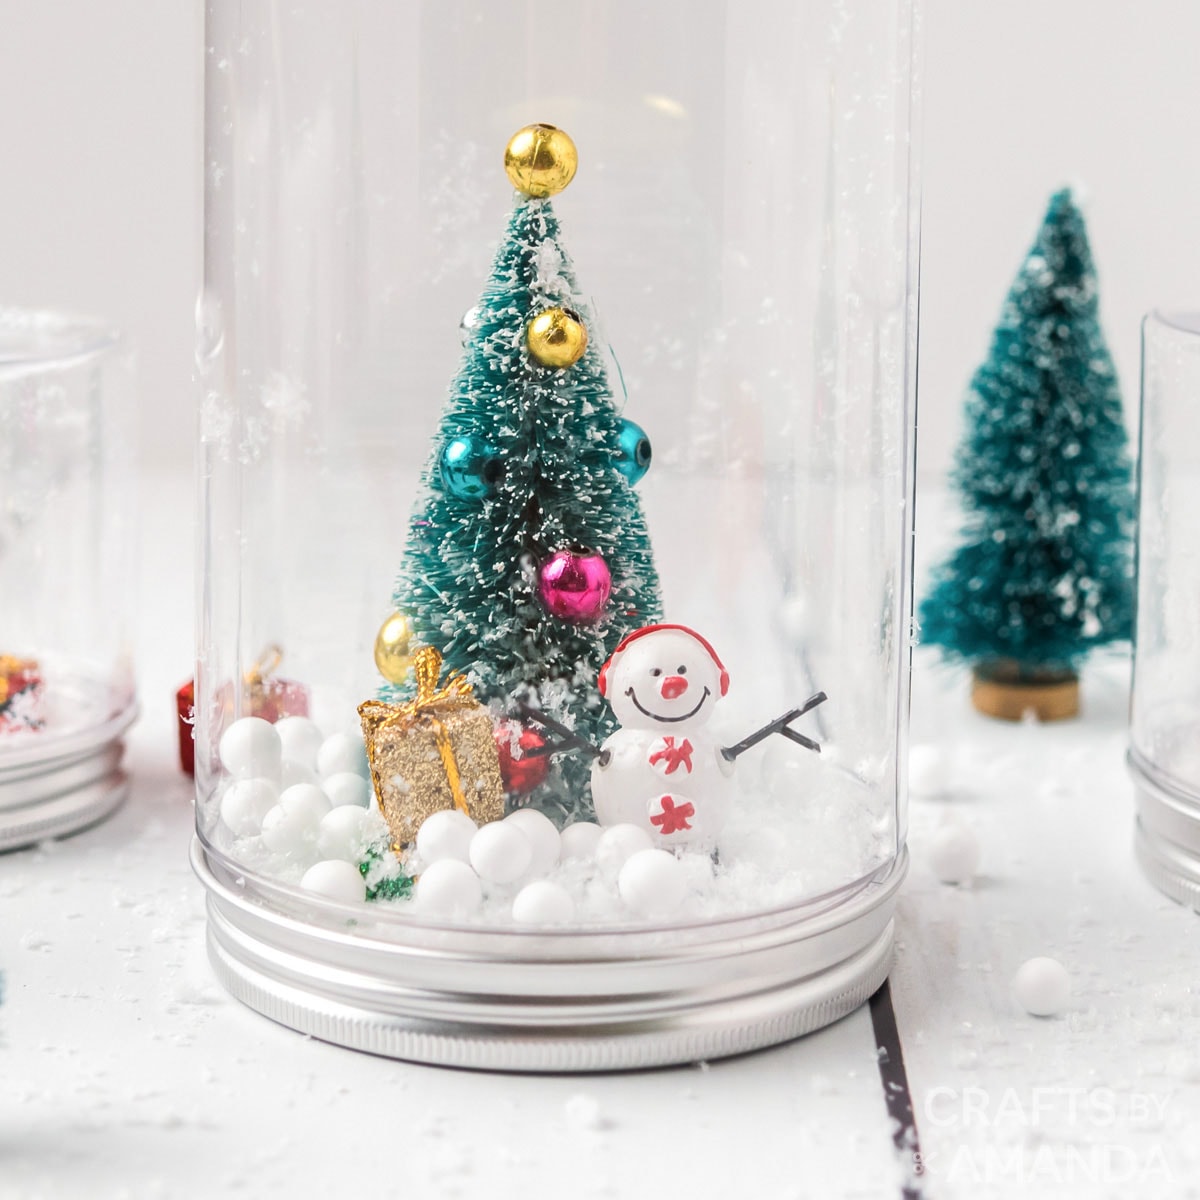 waterless snowglobe with a tree, presents and a snowman inside